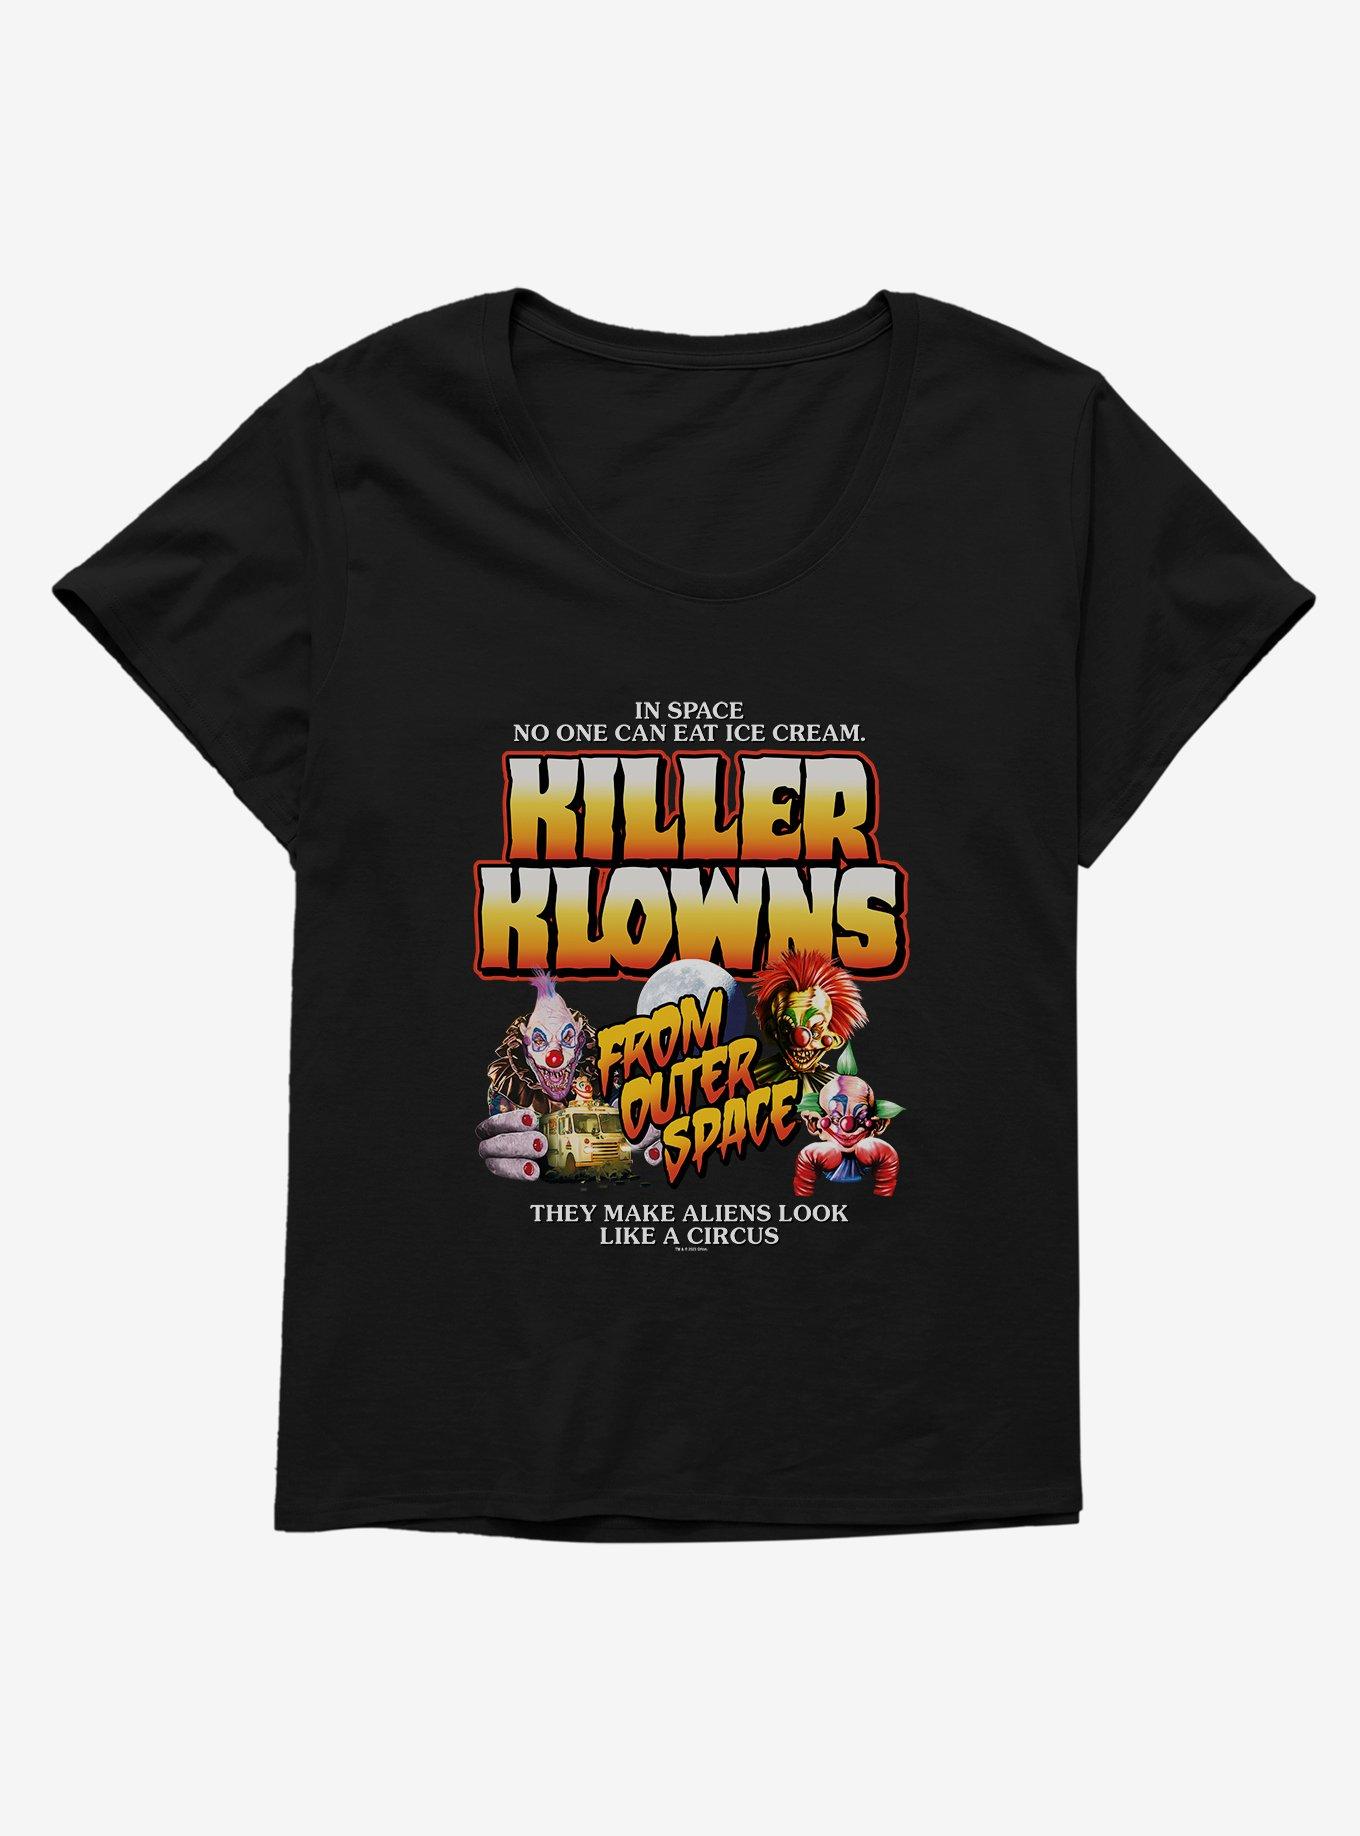 Killer Klowns From Outer Space In Space No One Can Eat Ice Cream Girls T-Shirt Plus Size, BLACK, hi-res